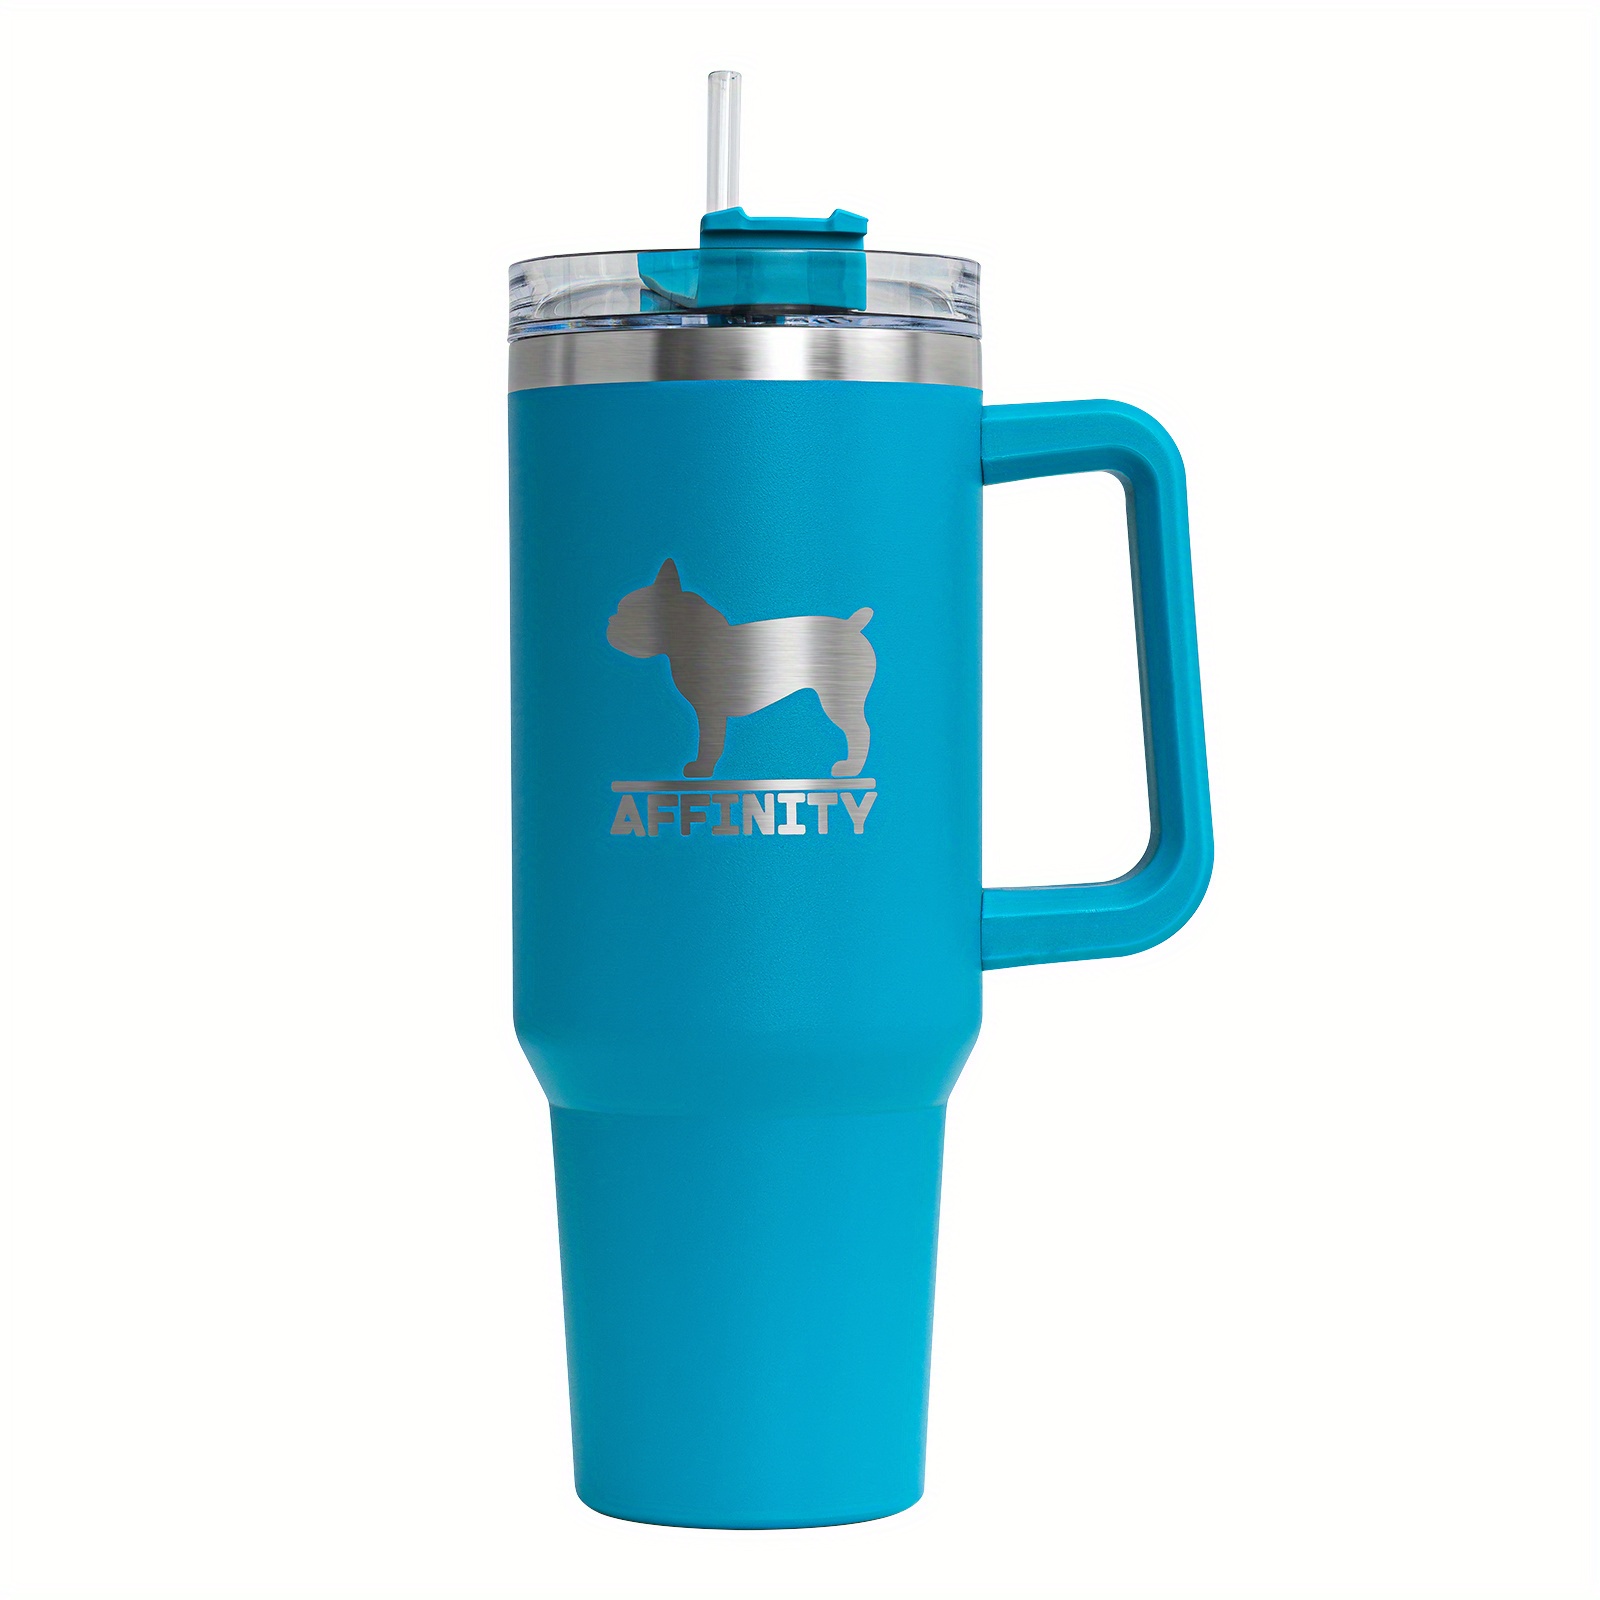 The Beast Reusable Stainless Steel Double Insulated Tumbler With